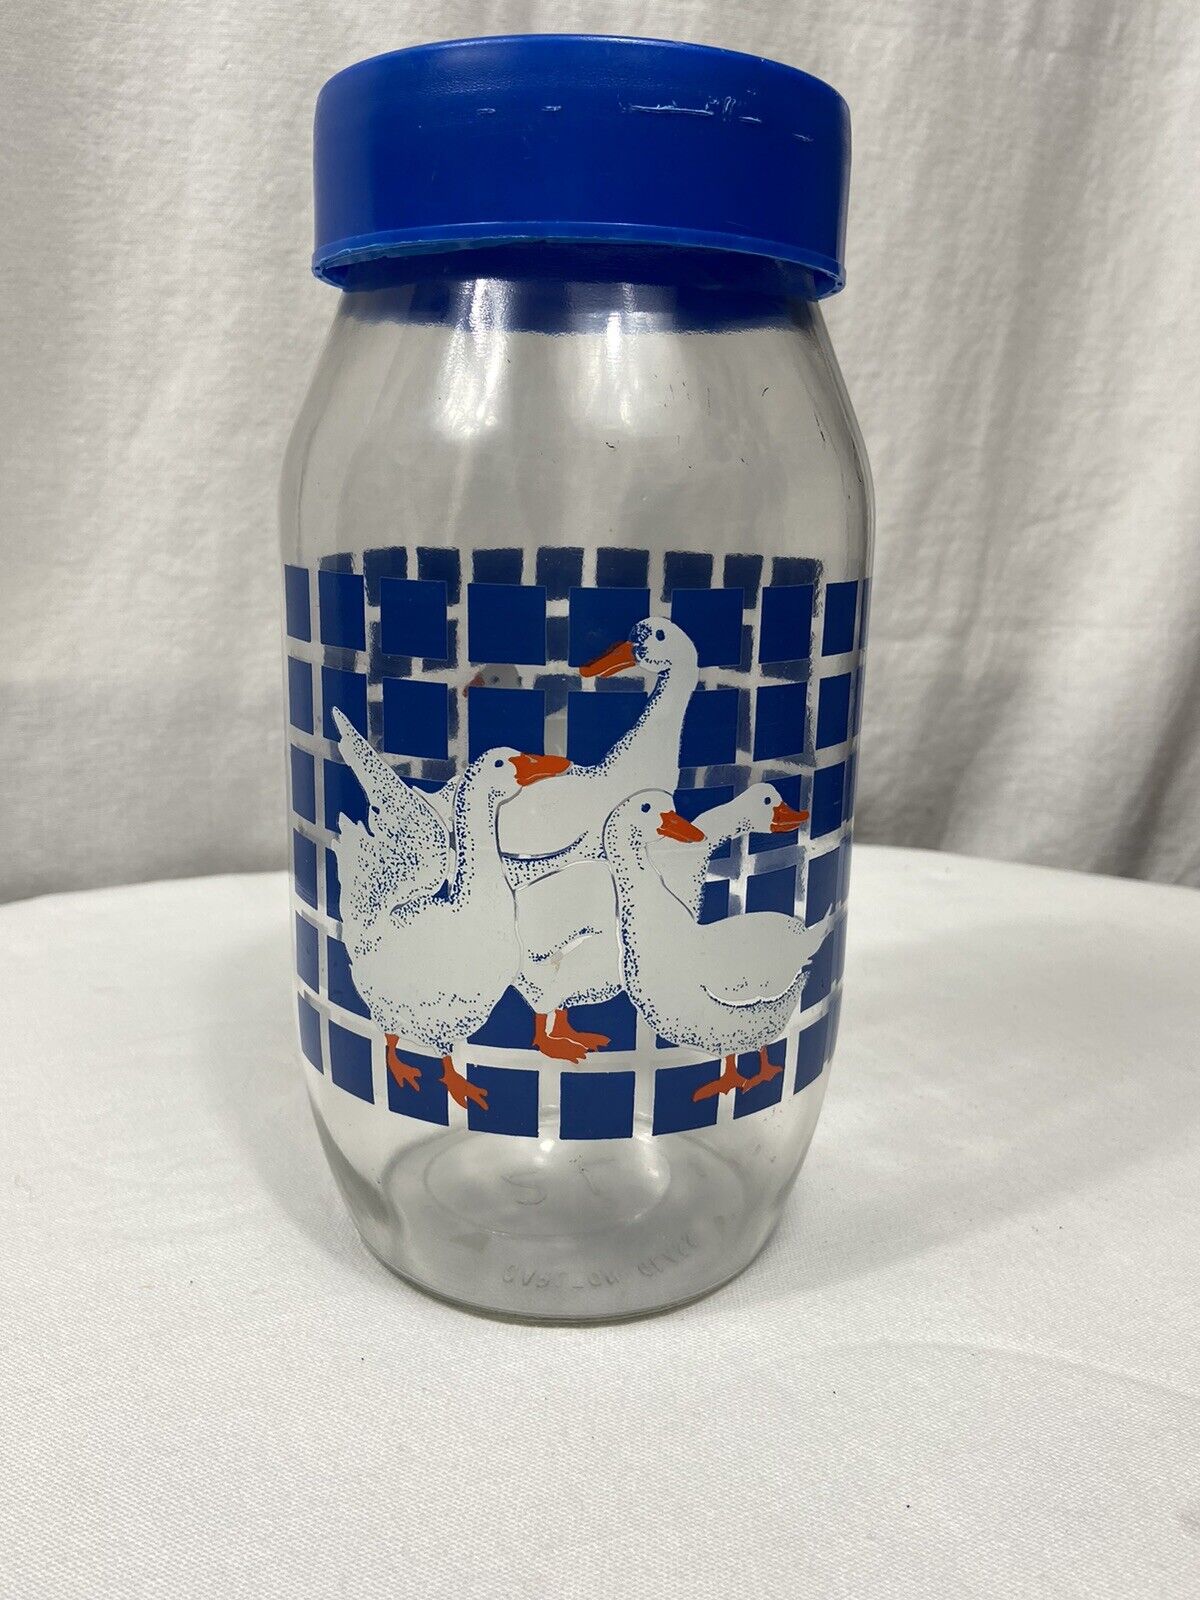 Vintage Blue Ribbon Geese 2 Liter Glass Canister Jar With Lid Storage Ducks 90s